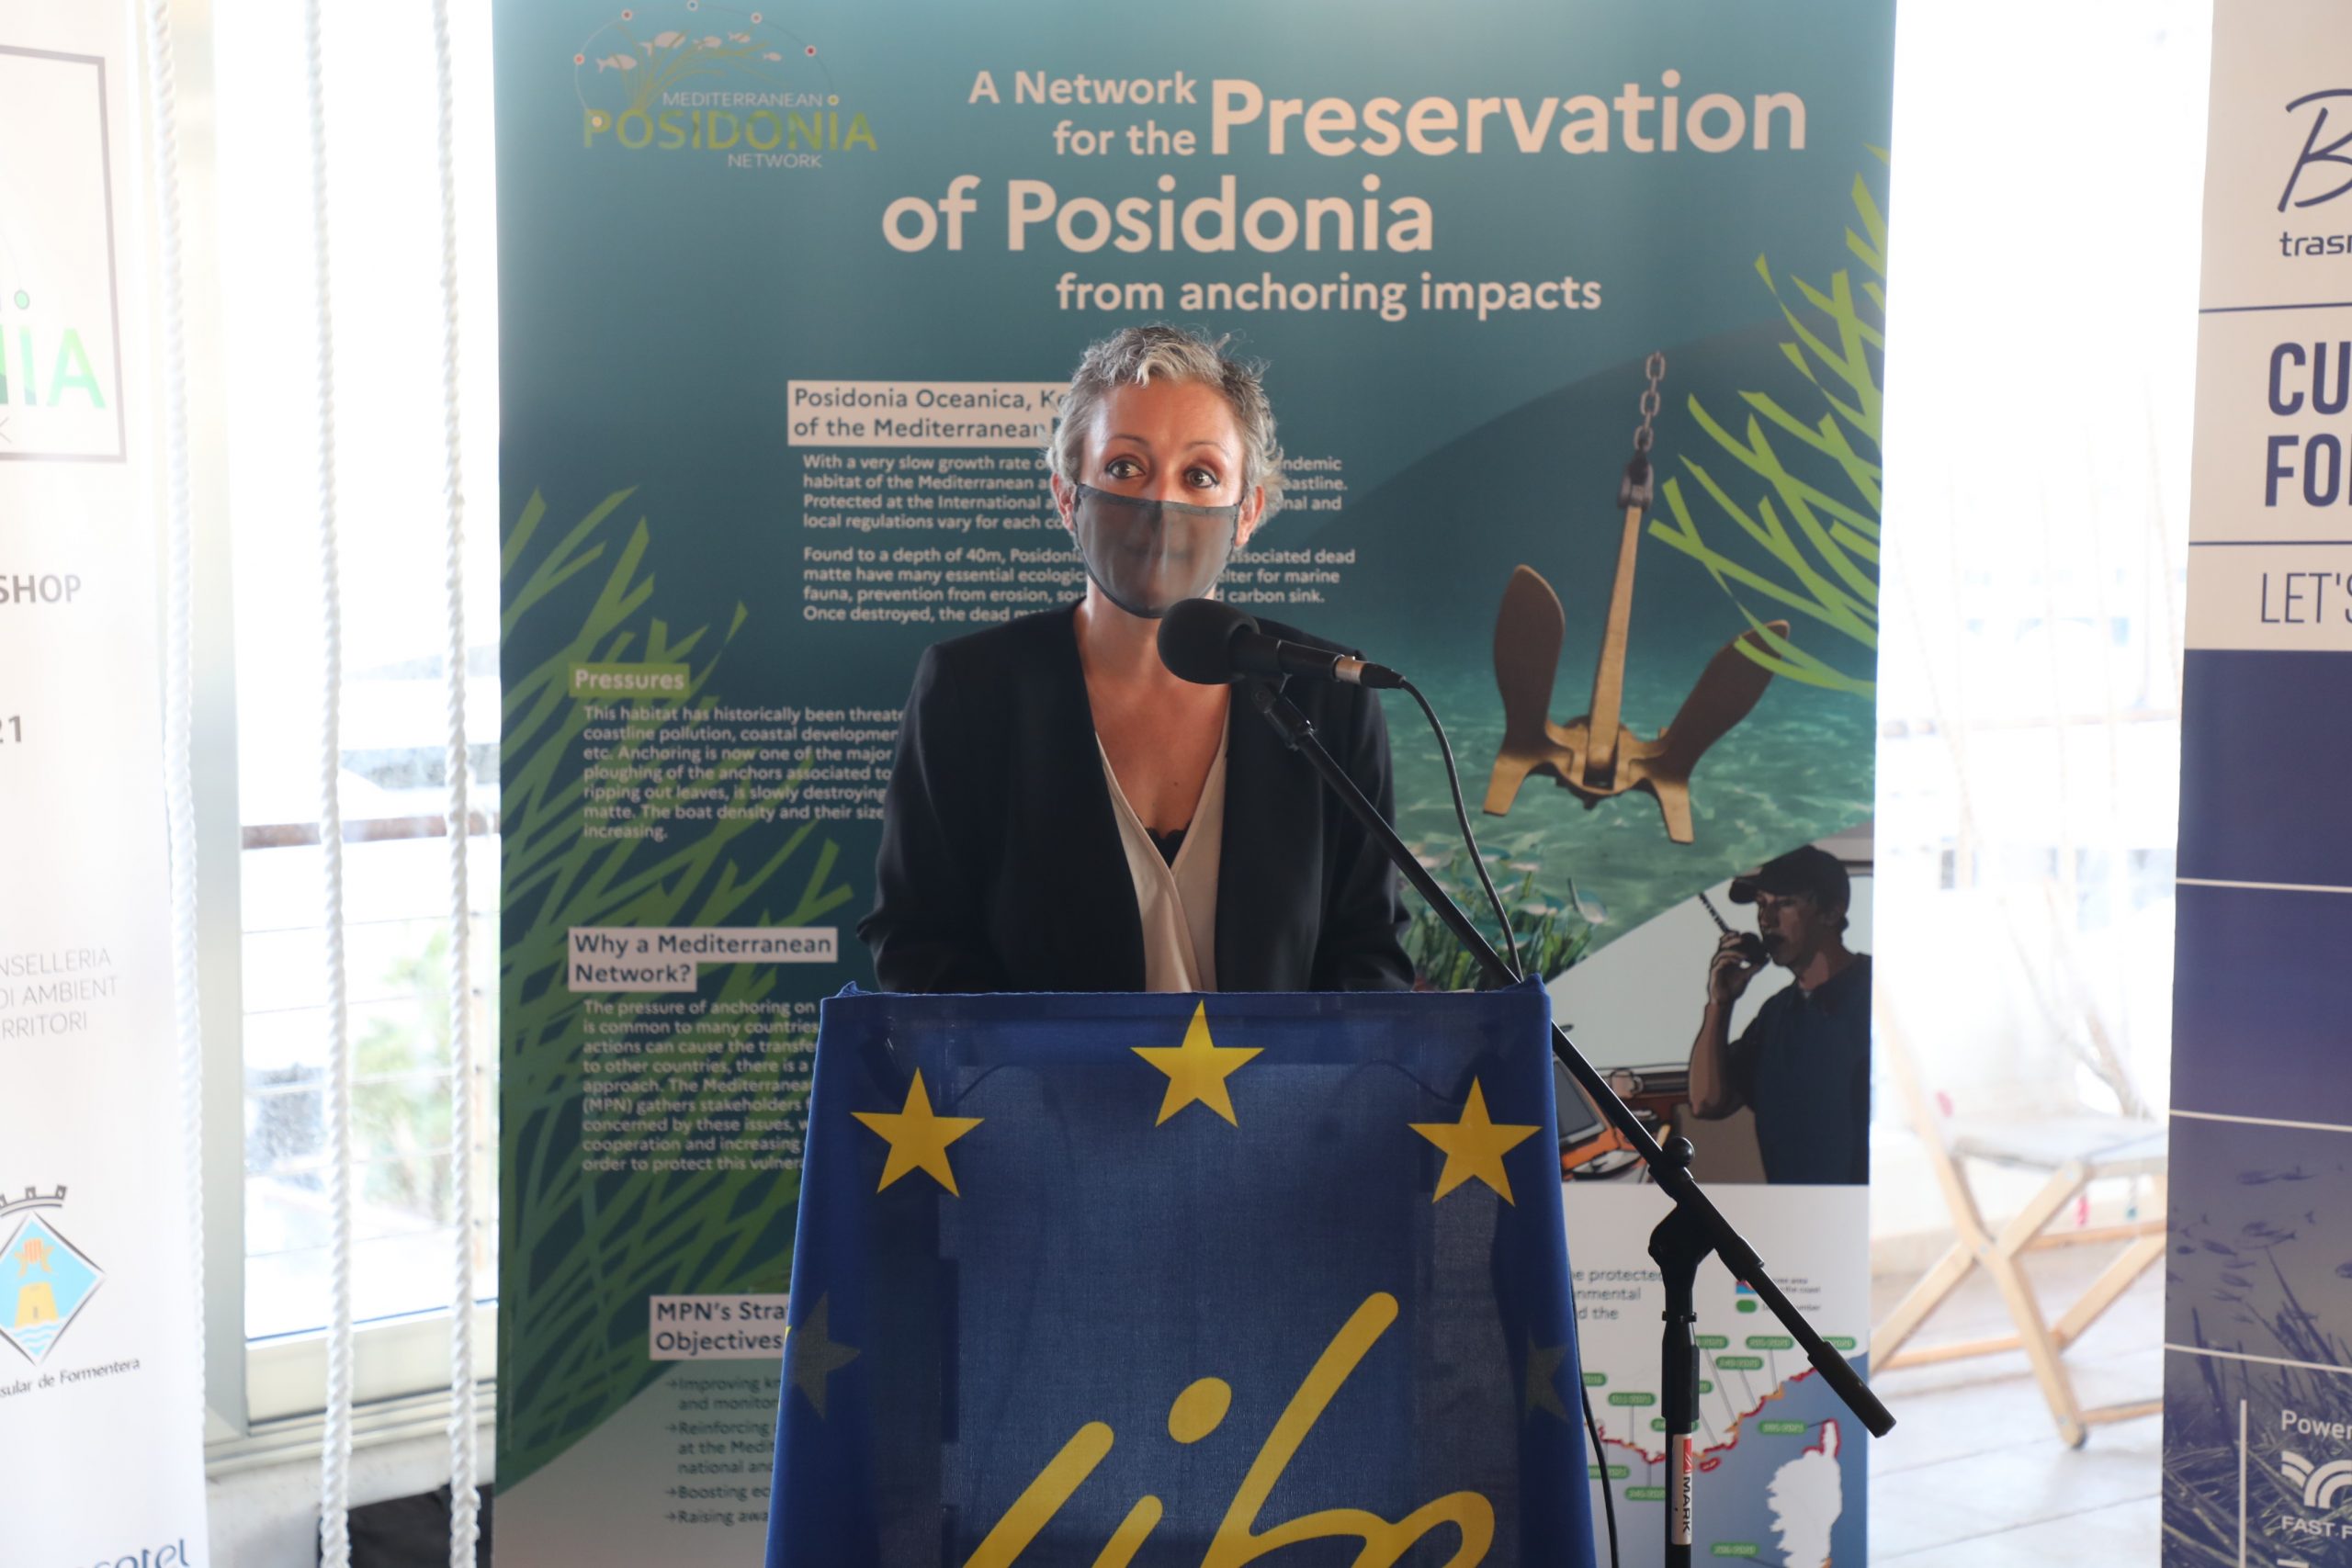 Formentera, Starting Point To Establish European Policy For Protection Of Posidonia